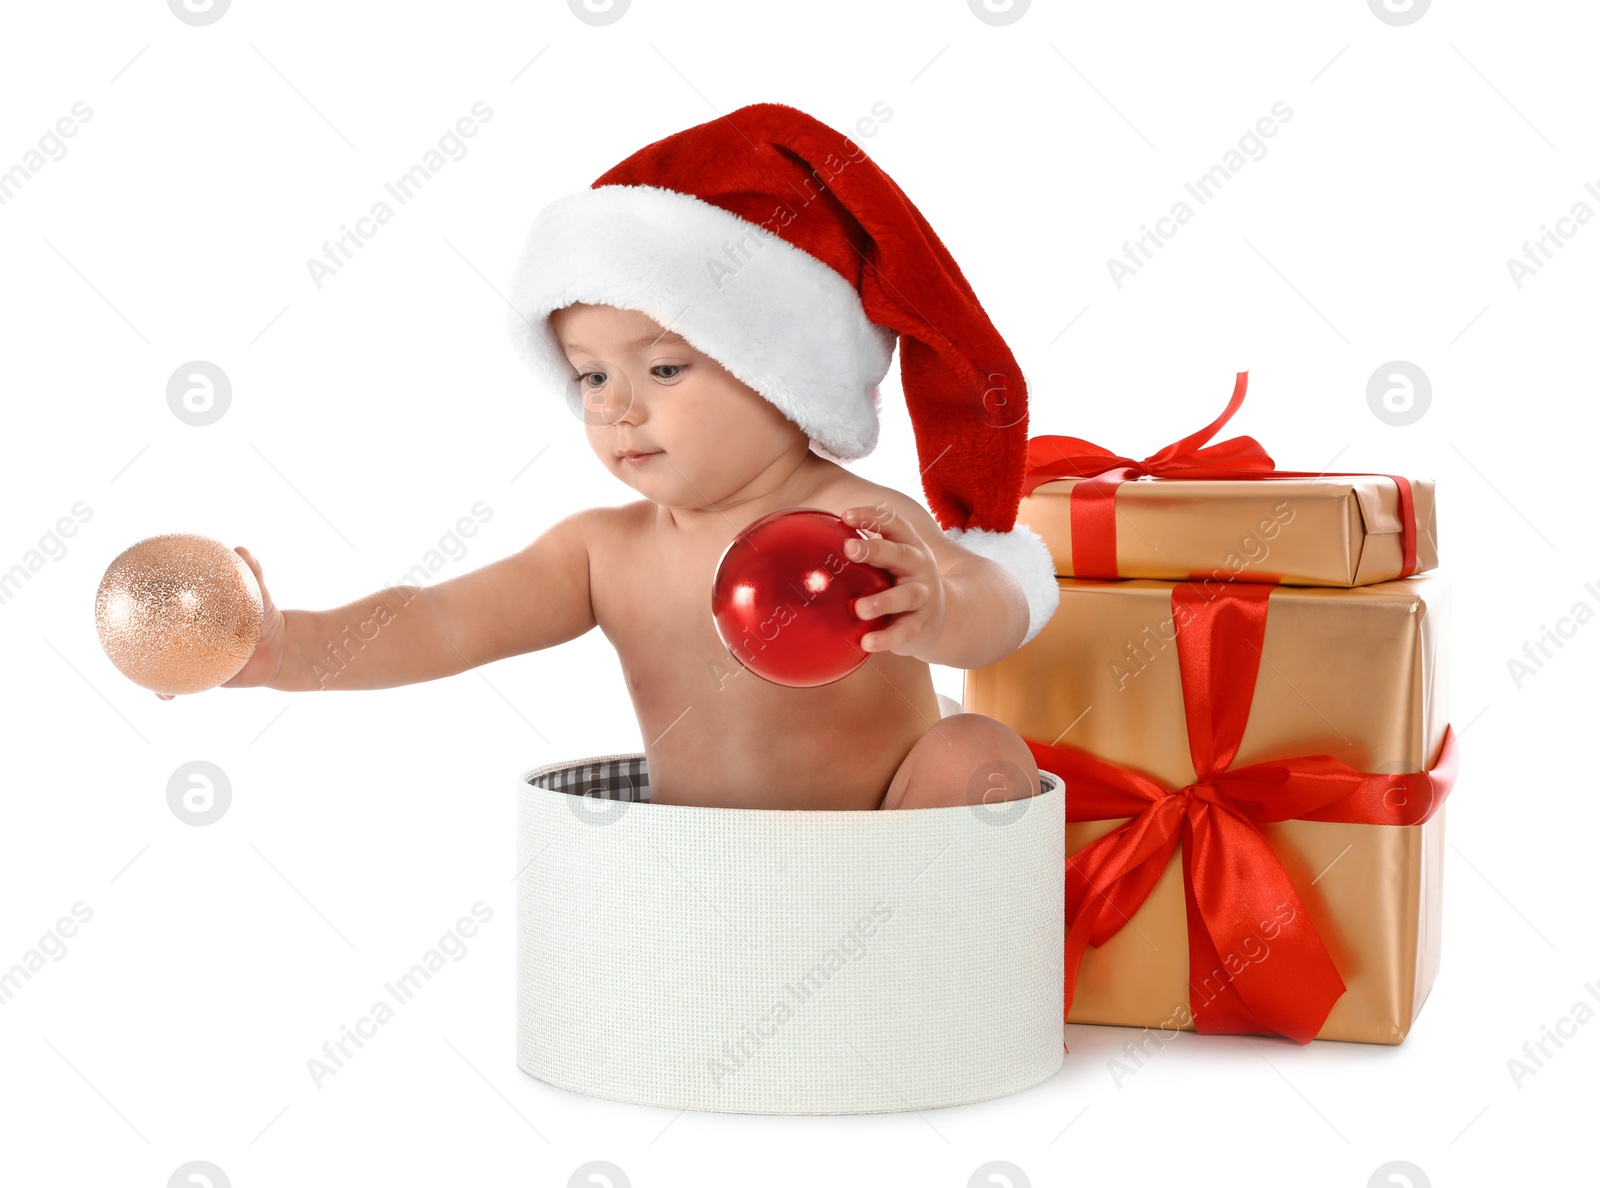 Photo of Cute little baby wearing Santa hat with Christmas gifts sitting in box on white background